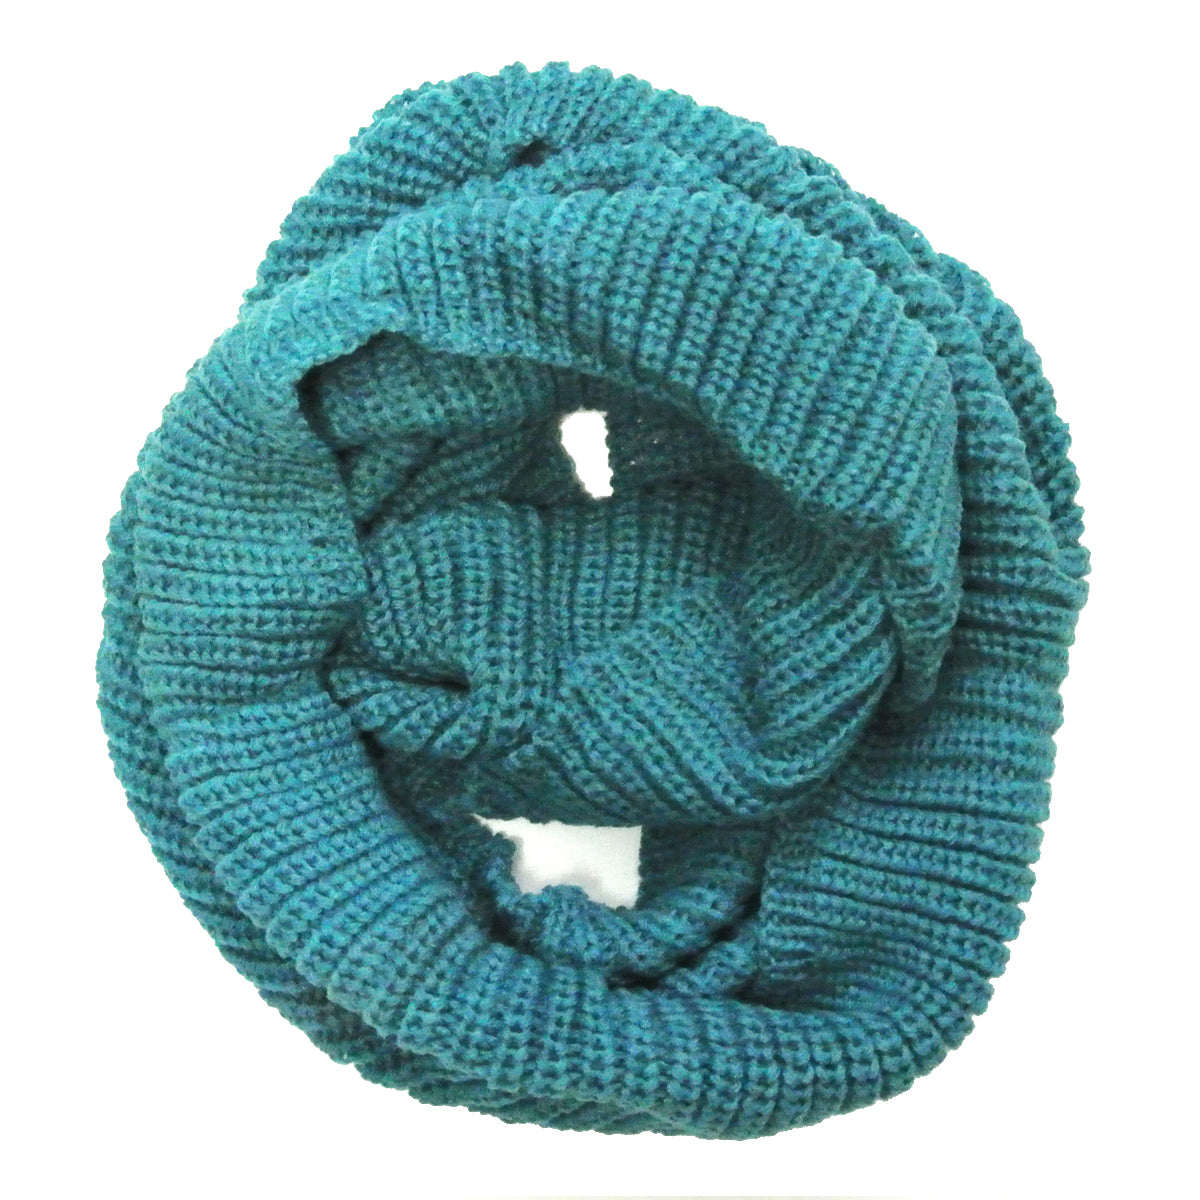 SCARF Knitted Infinity Loop Scarf Chunky Brown Teal Button 